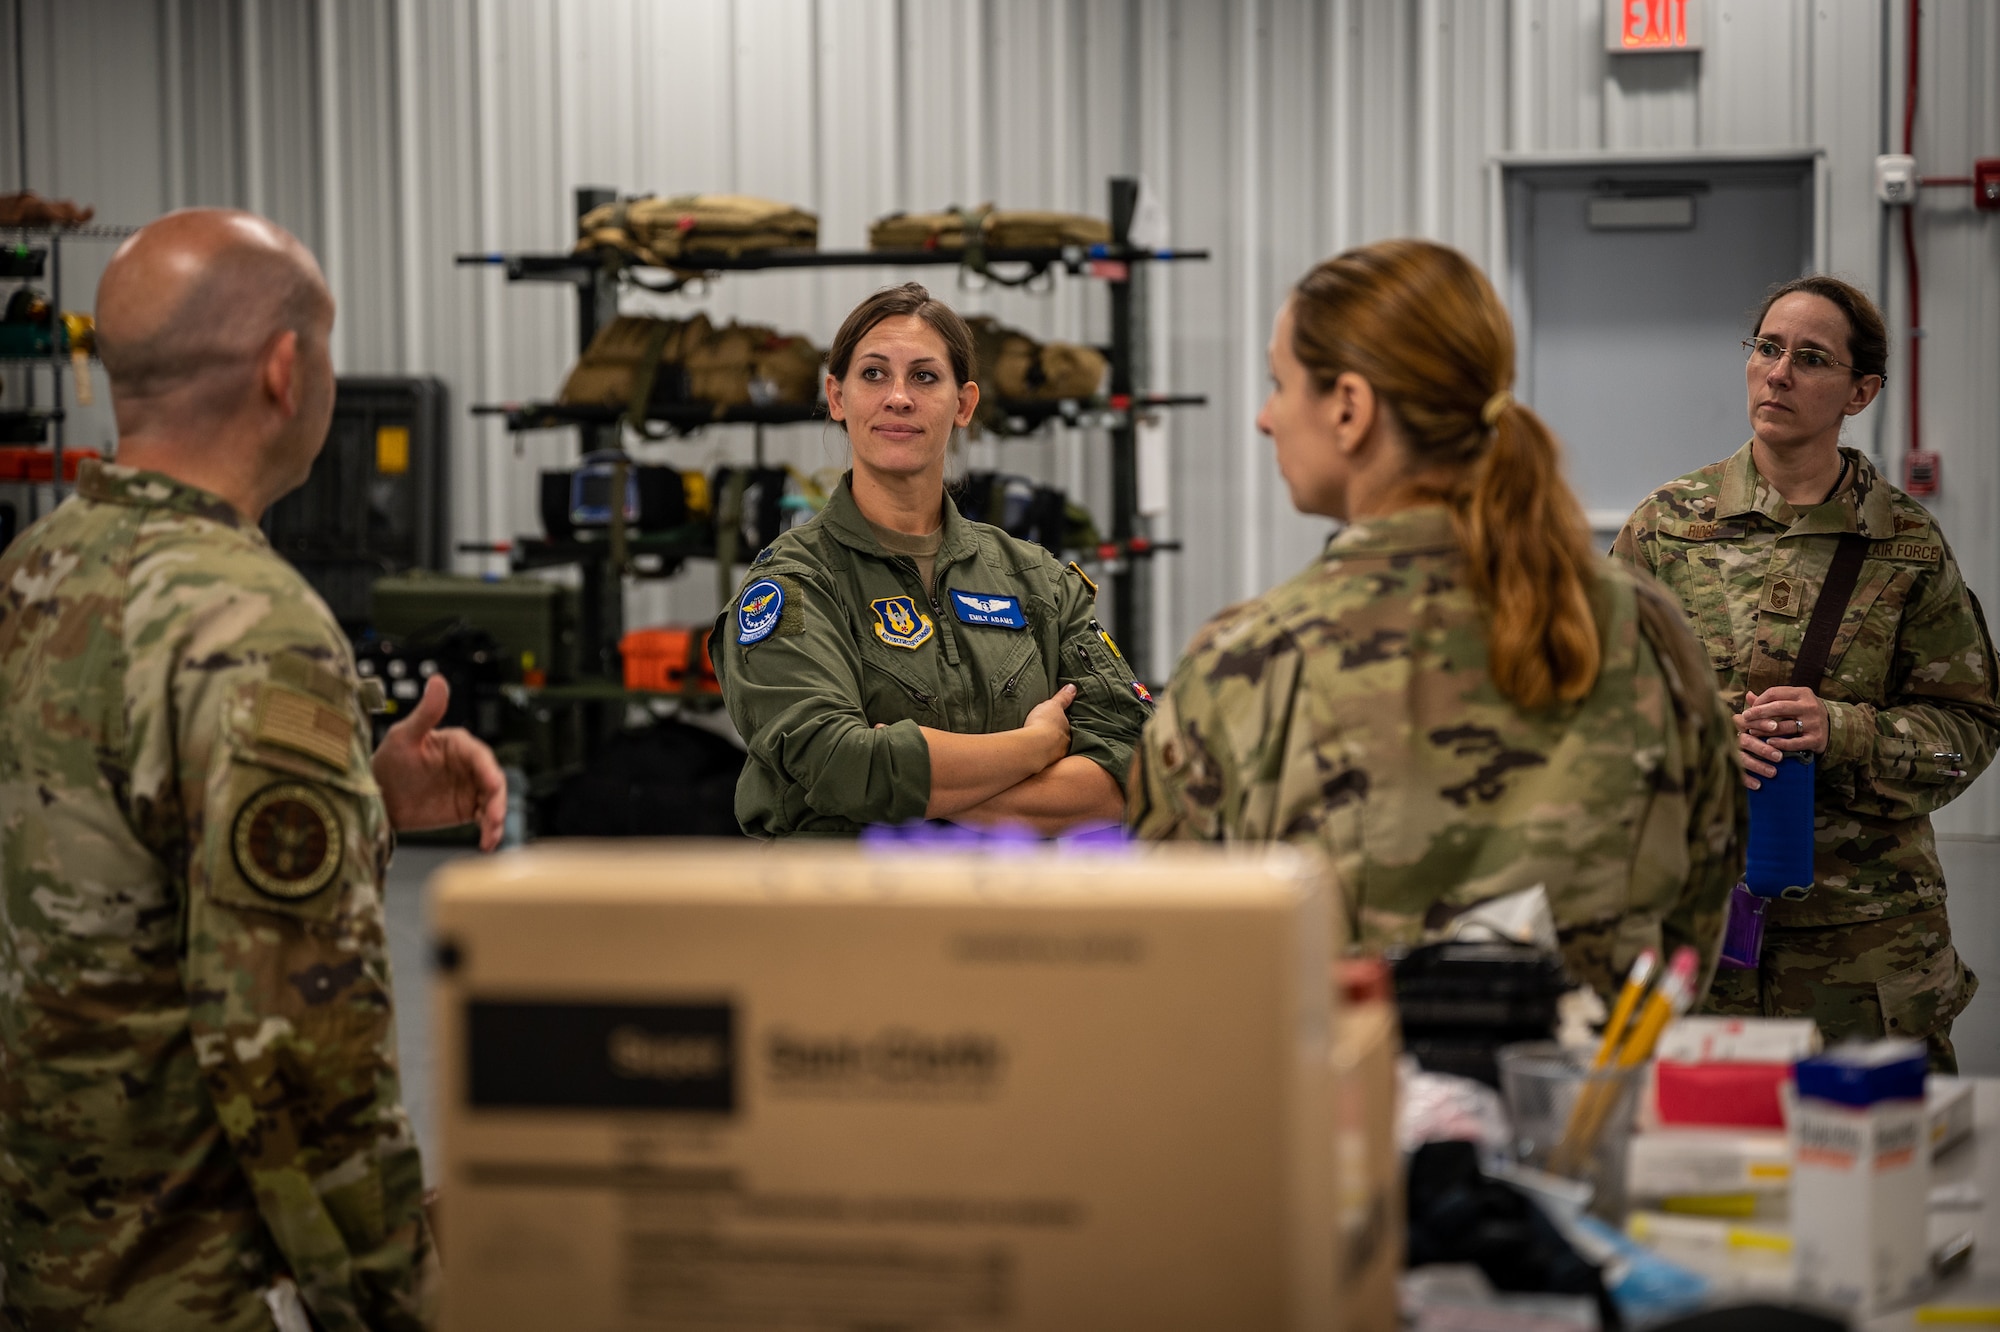 During the August unit training assembly, Citizen Airmen from the 932nd Medical Group were visited by Col. Nichole Hurley, Air Force Reserve Command command nurse, Col. Julianna Olson, AFRC deputy command surgeon, and Senior Master Sgt. J. Allan Pickren, MAJCOM functional manager, Aug. 5, 2023, Scott Air Force Base, Ill. During the visit, the senior leaders imparted invaluable advice, fostering a sense of pride and purpose among the medical Citizen Airmen, and took time to acknowledge some star performers. (U.S. Air Force photo by Christopher Parr)